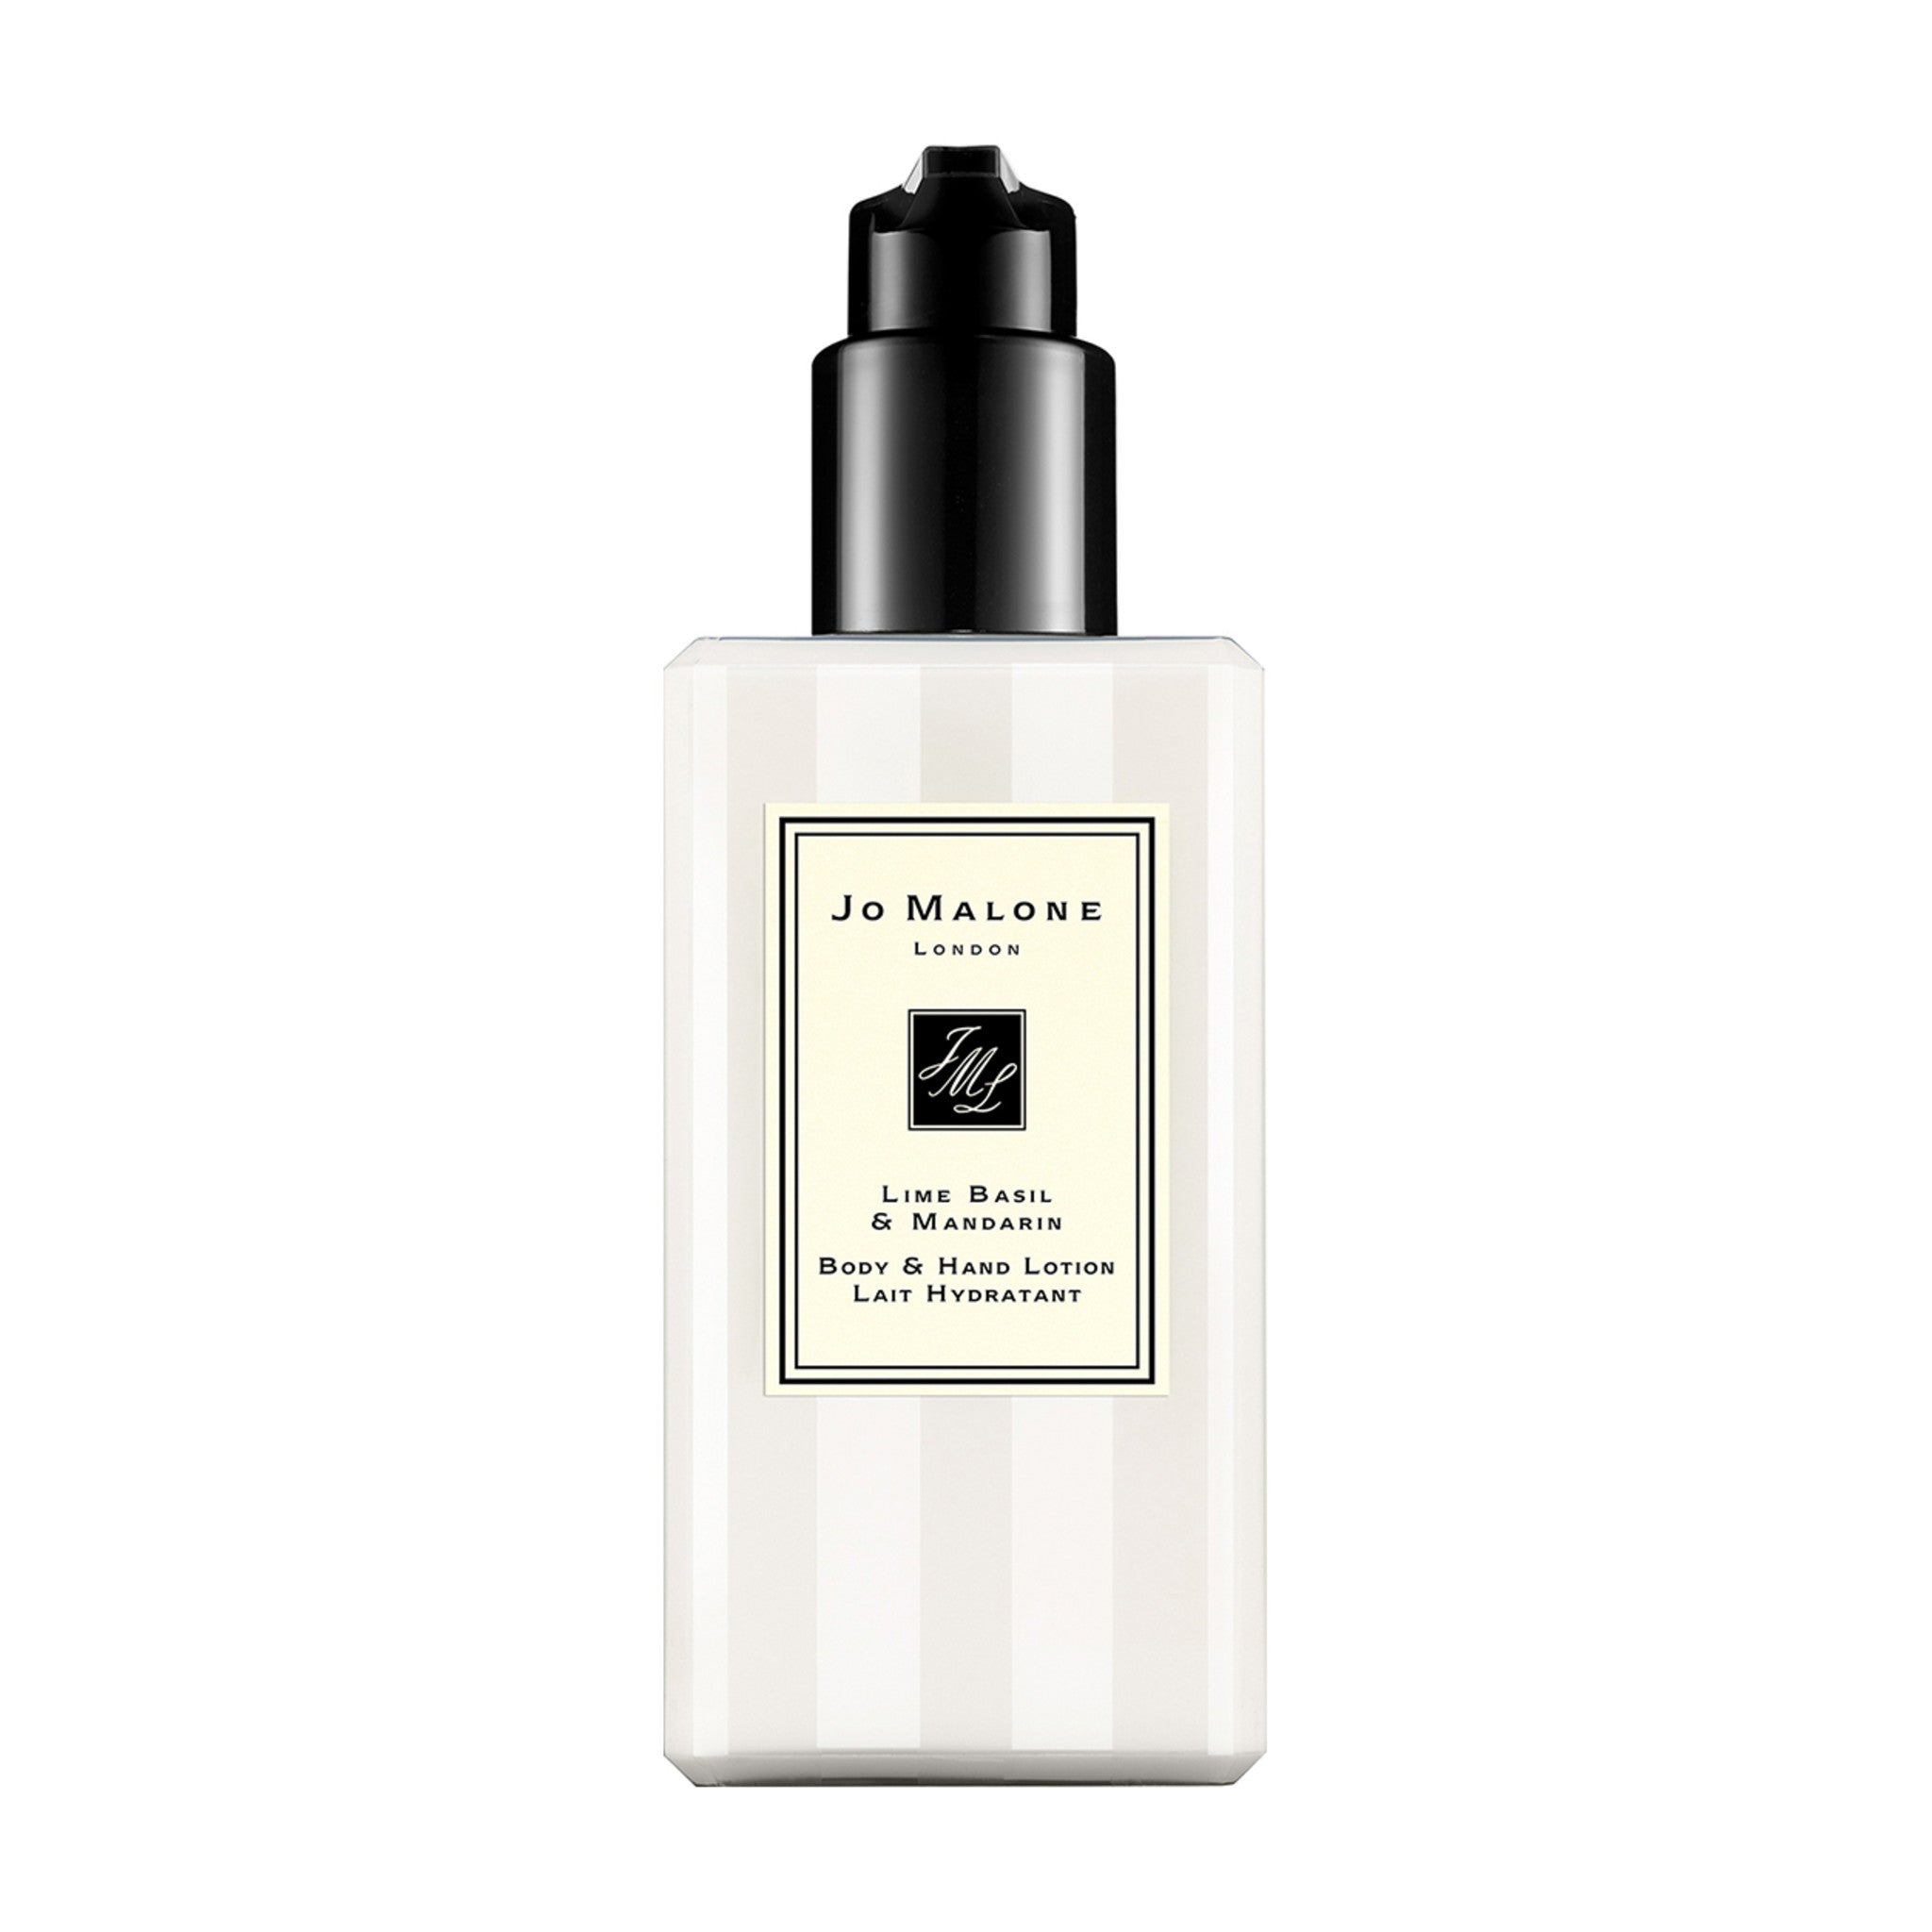 Jo Malone London Lime Basil and Mandarin Body and Hand Lotion Size variant: 250 ml main image.